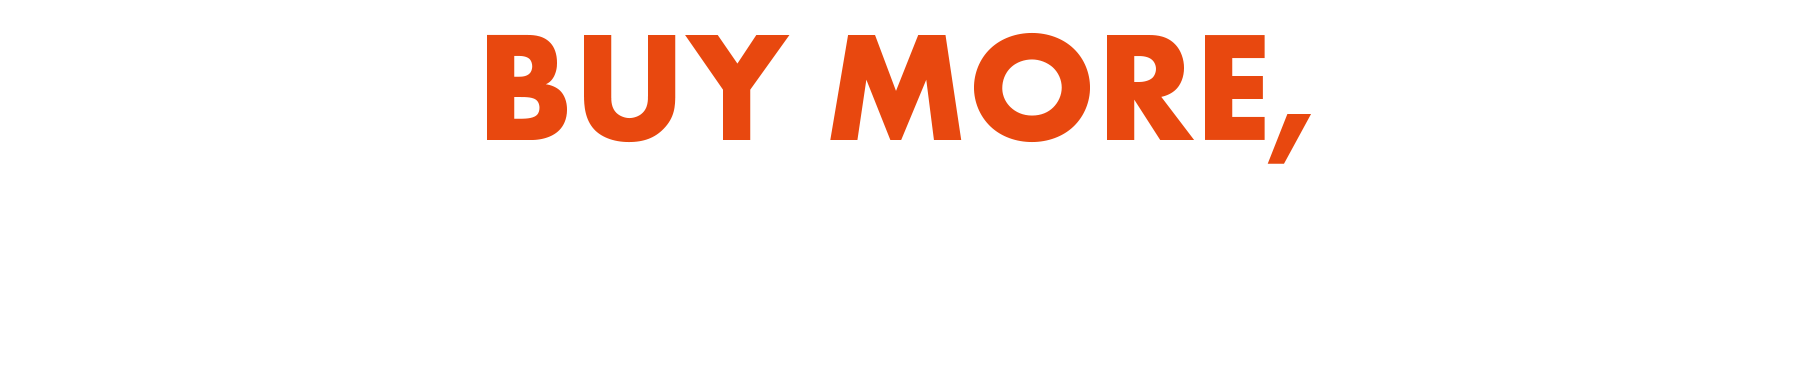 Buy More, Save More